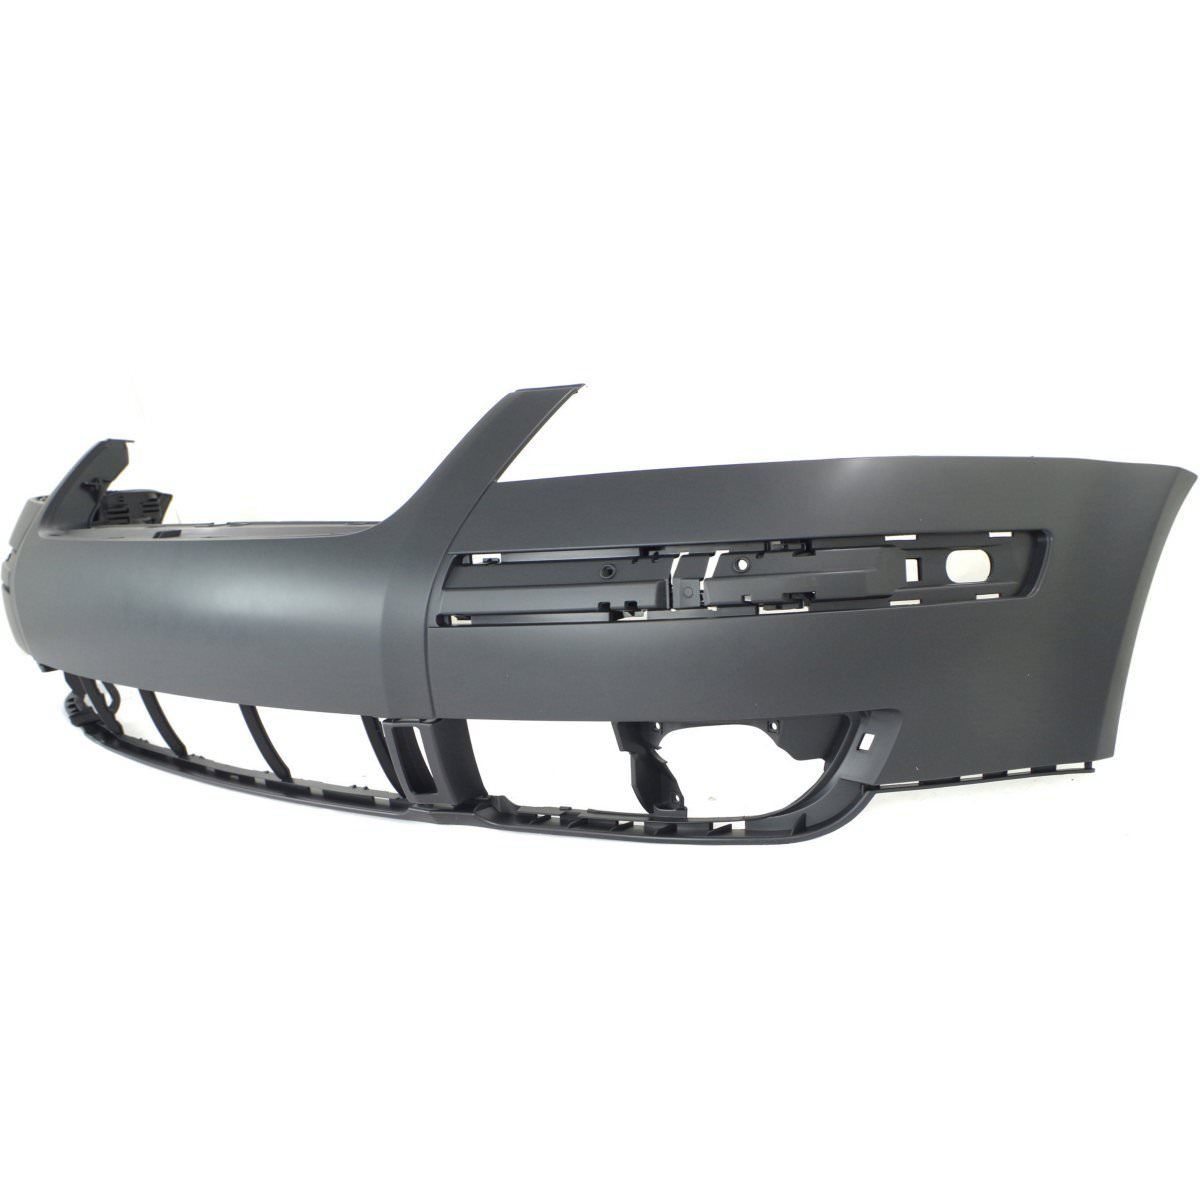 2001-2005 VOLKSWAGEN PASSAT Front Bumper Cover late design  w/o headlamp washer Painted to Match